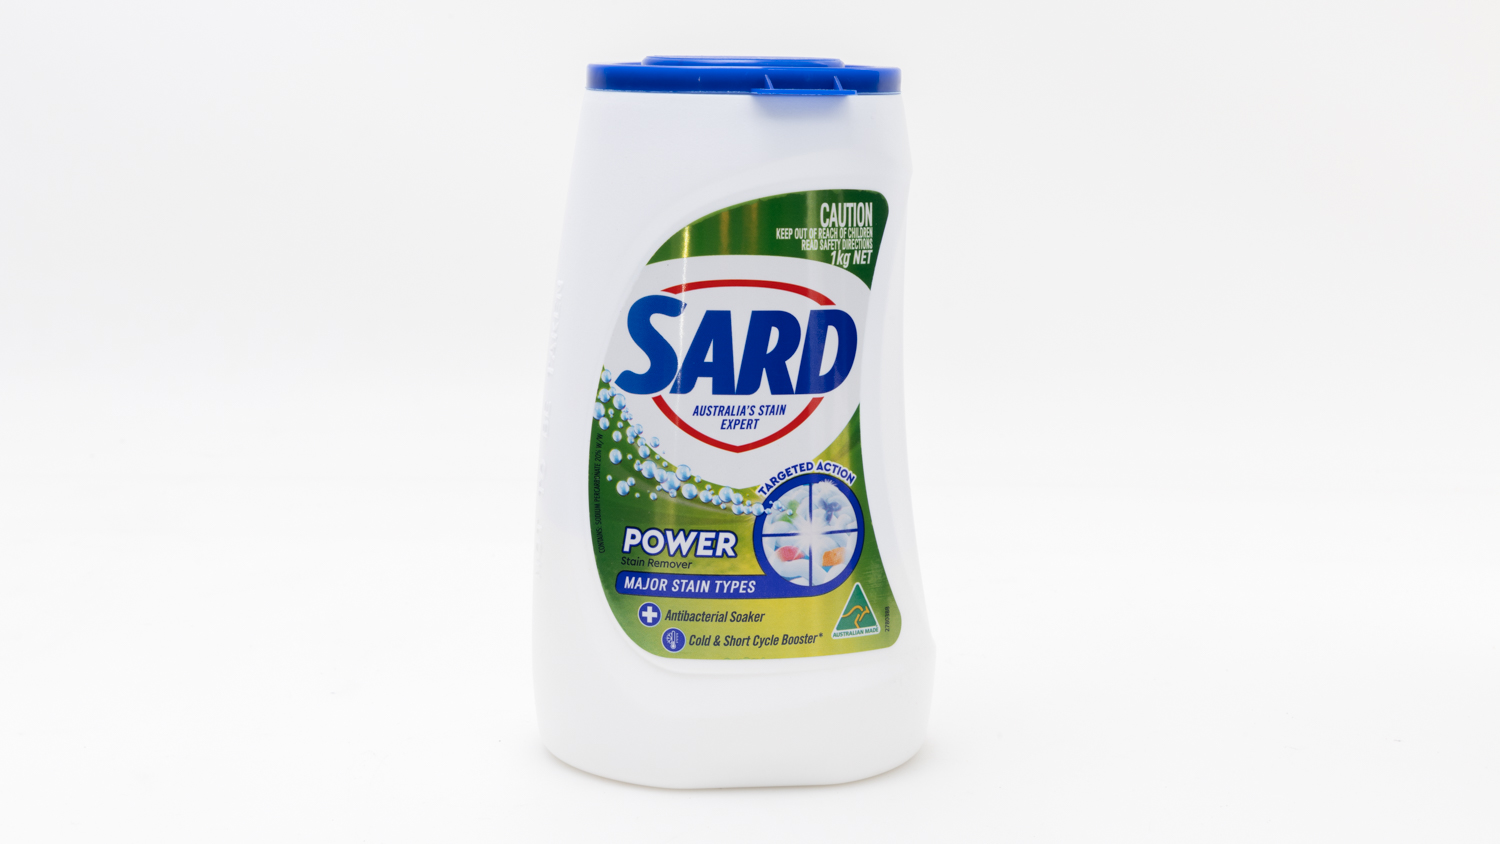 Sard Power Stain Remover Major Stain Types Antibacterial Soaker carousel image